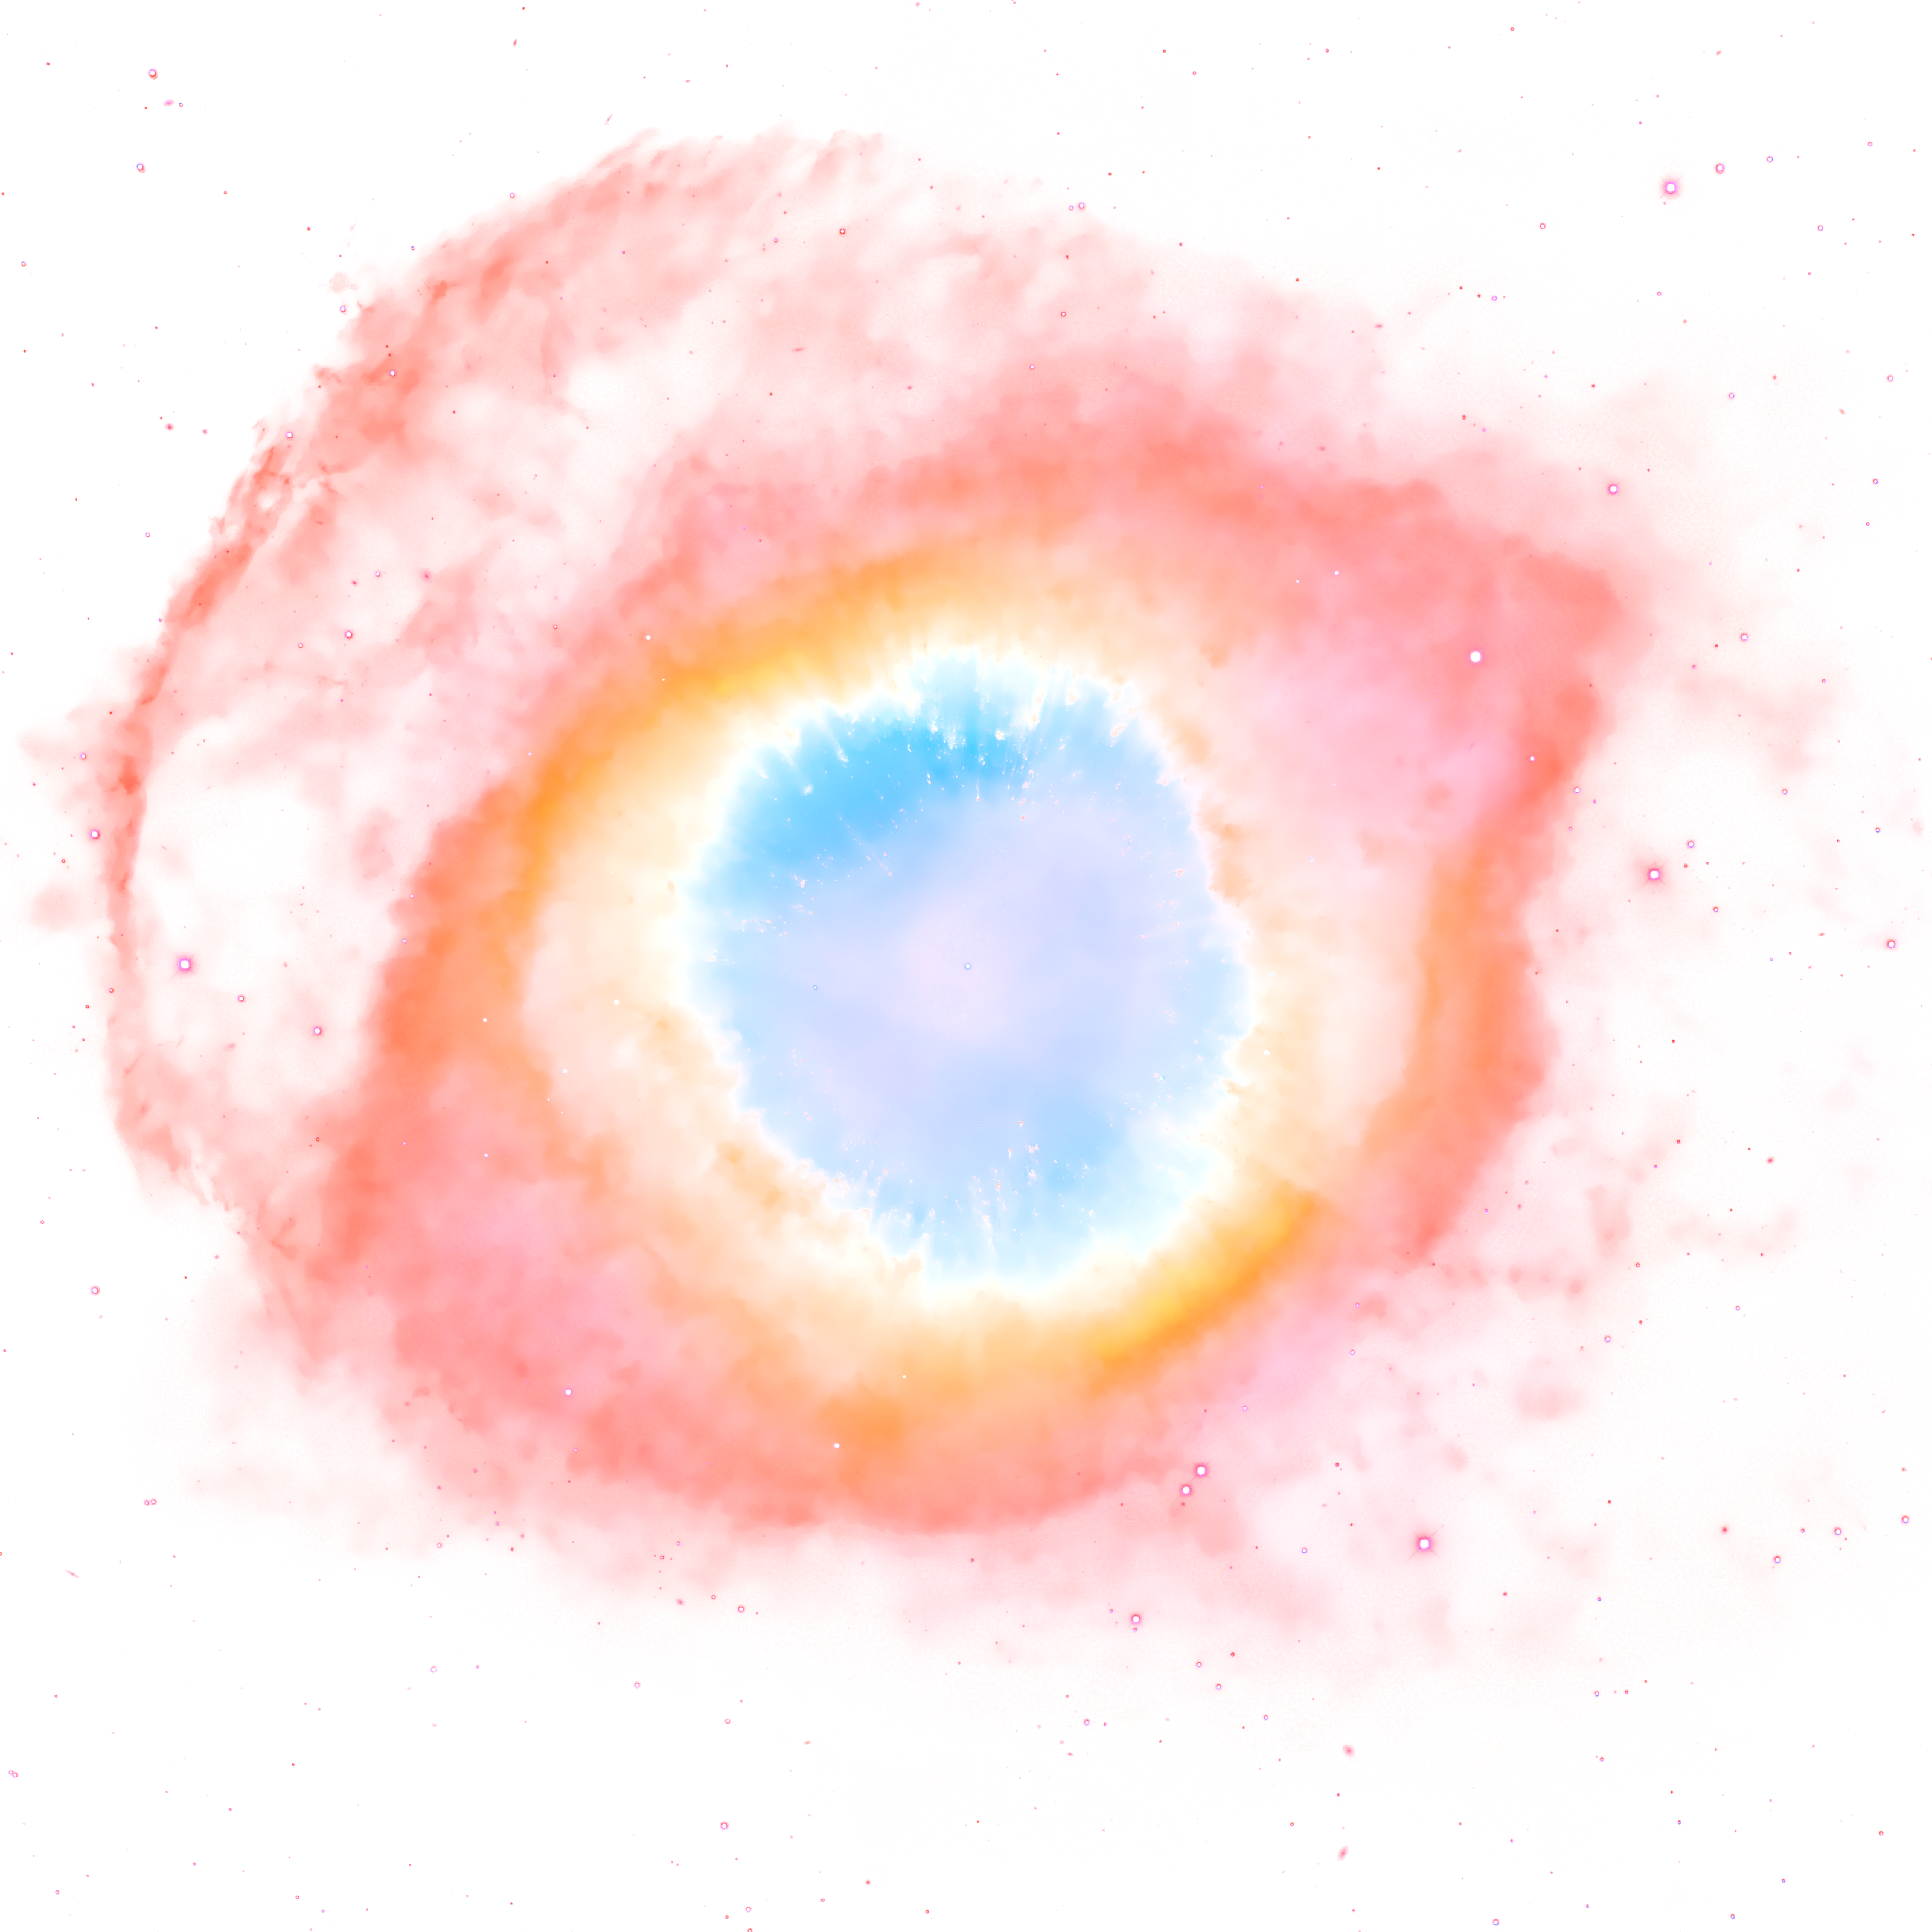 Png Transparent File Helix Nebula Png Wikimedia Commons - Png Transparent File Helix Nebula Png Wikimedia Commons (3200x3200)